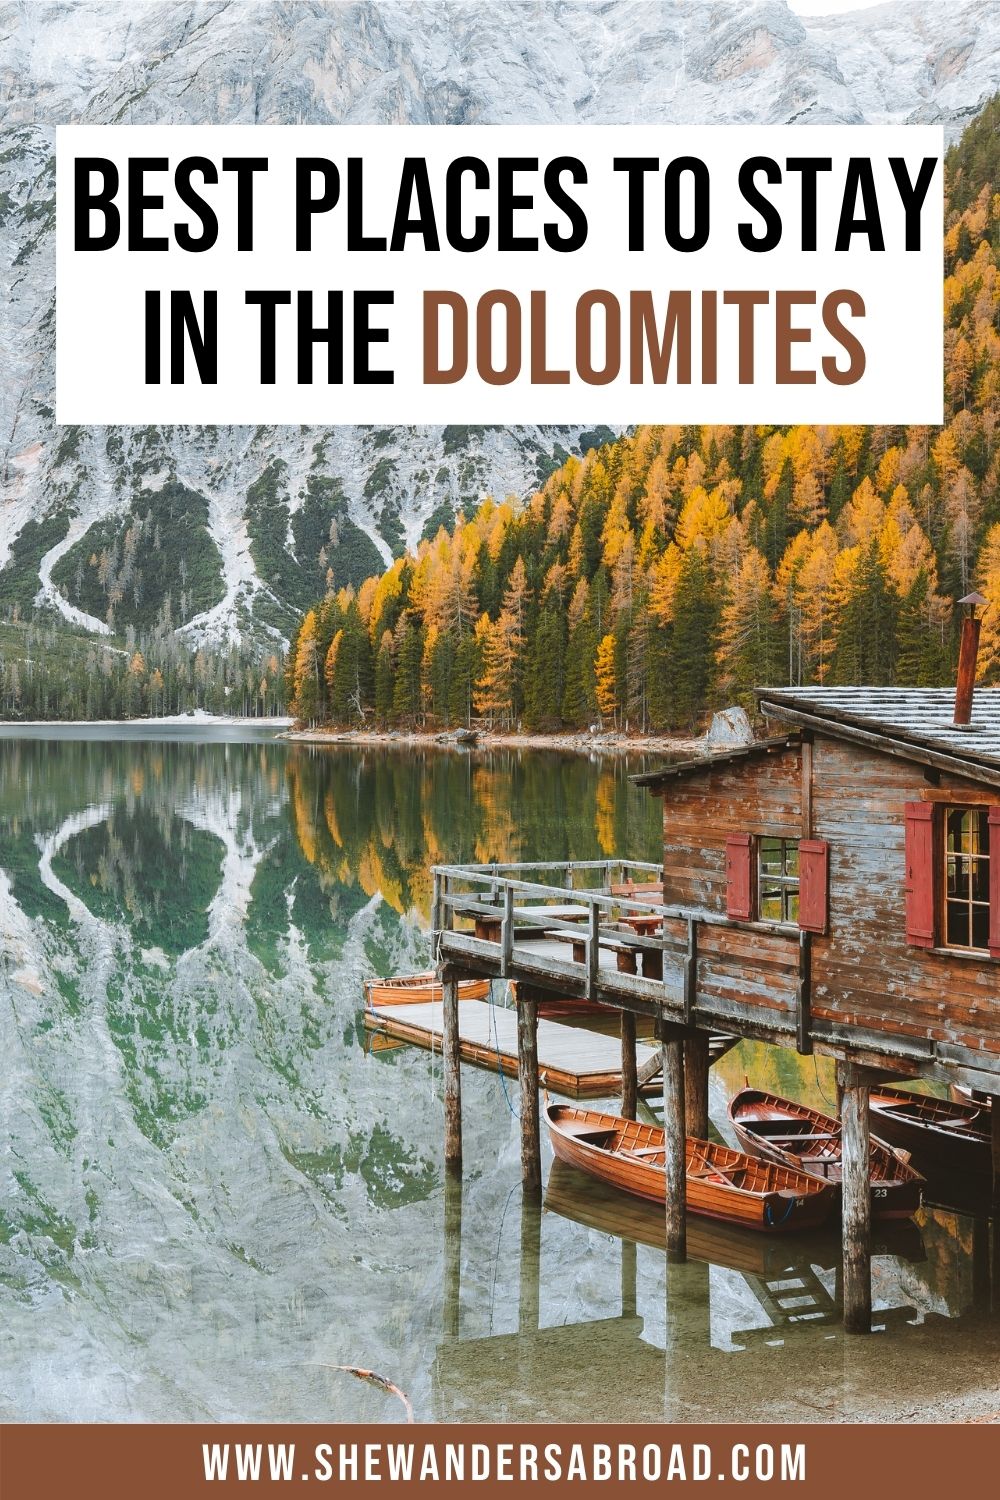 Where to Stay in the Dolomites: Best Areas & Hotels